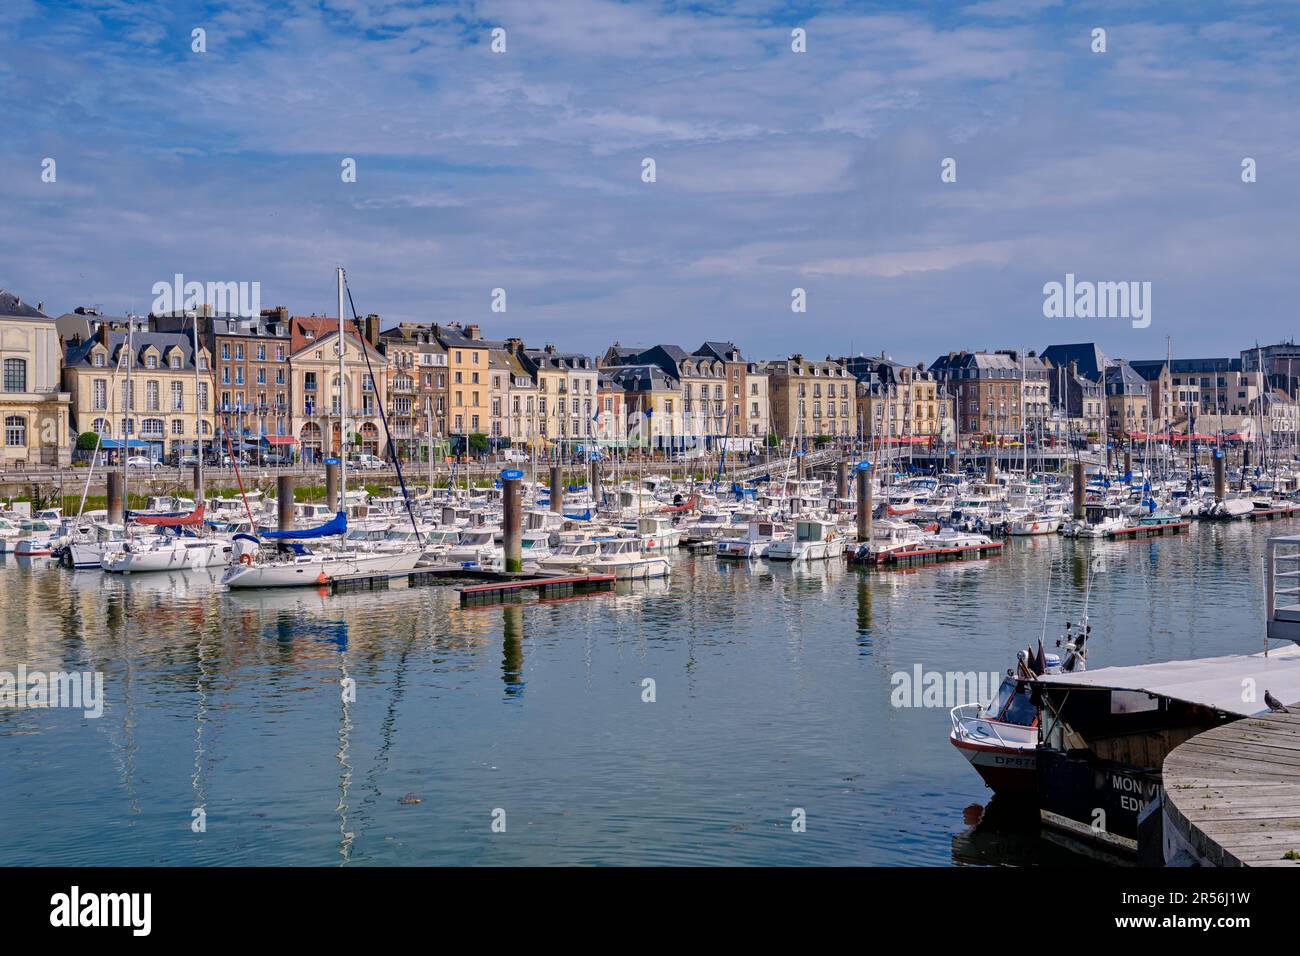 Dieppe, Normandy, France - June 24 2022: A panoramic view of the boats ...